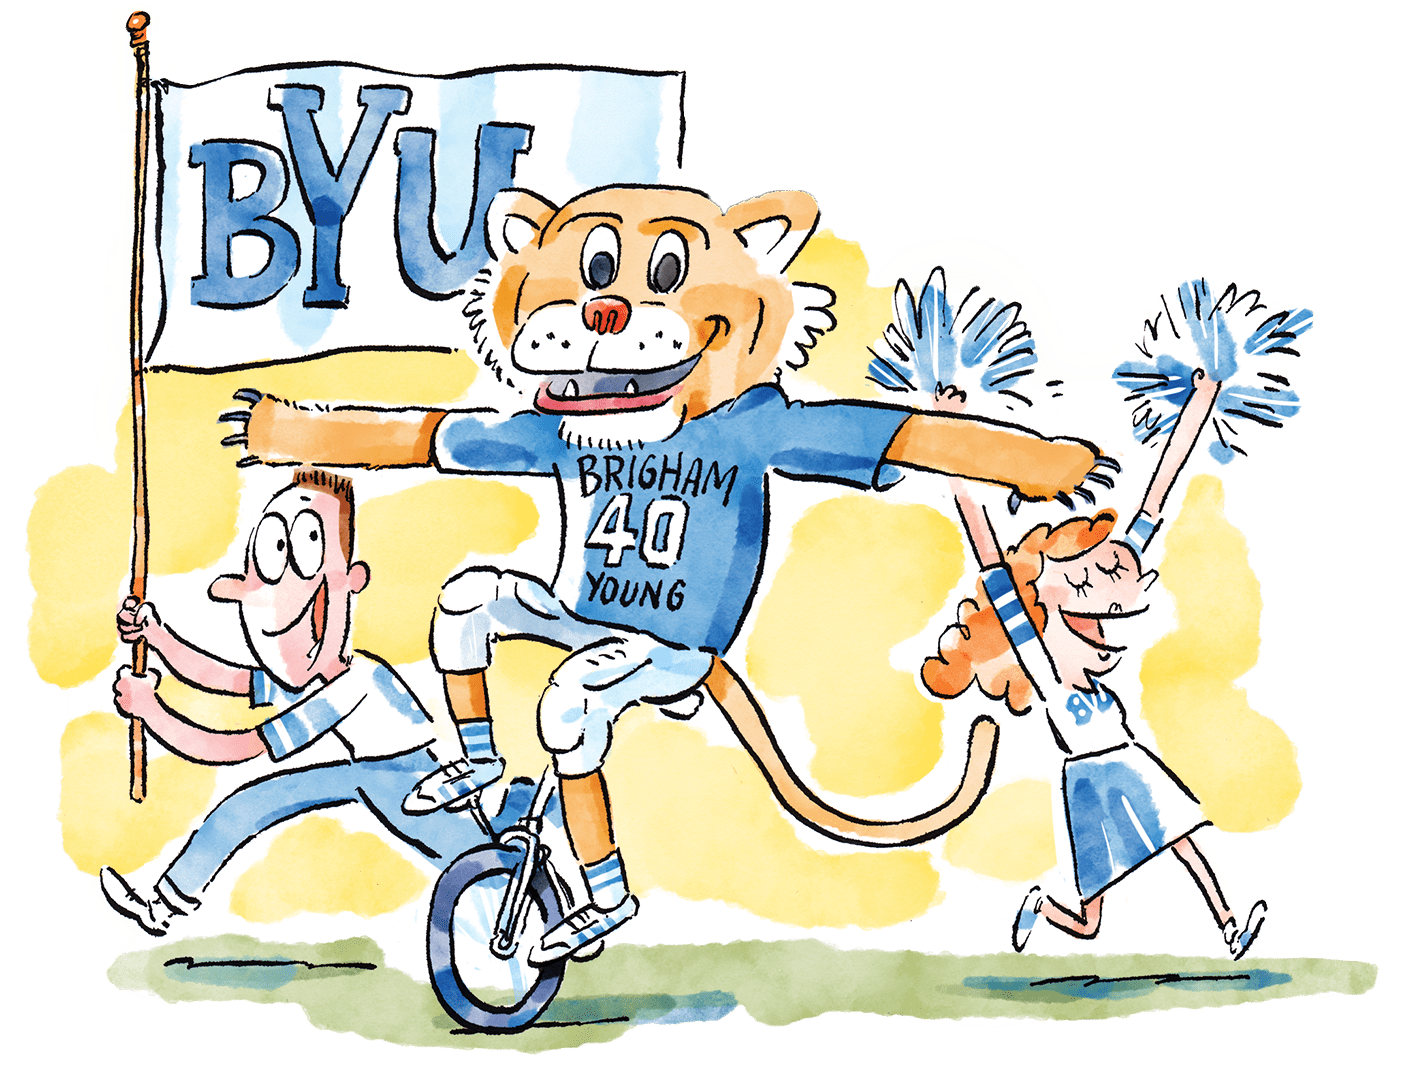 An illustration of Cosmo the Cougar riding a unicycle near cheering fans and cheerleaders.